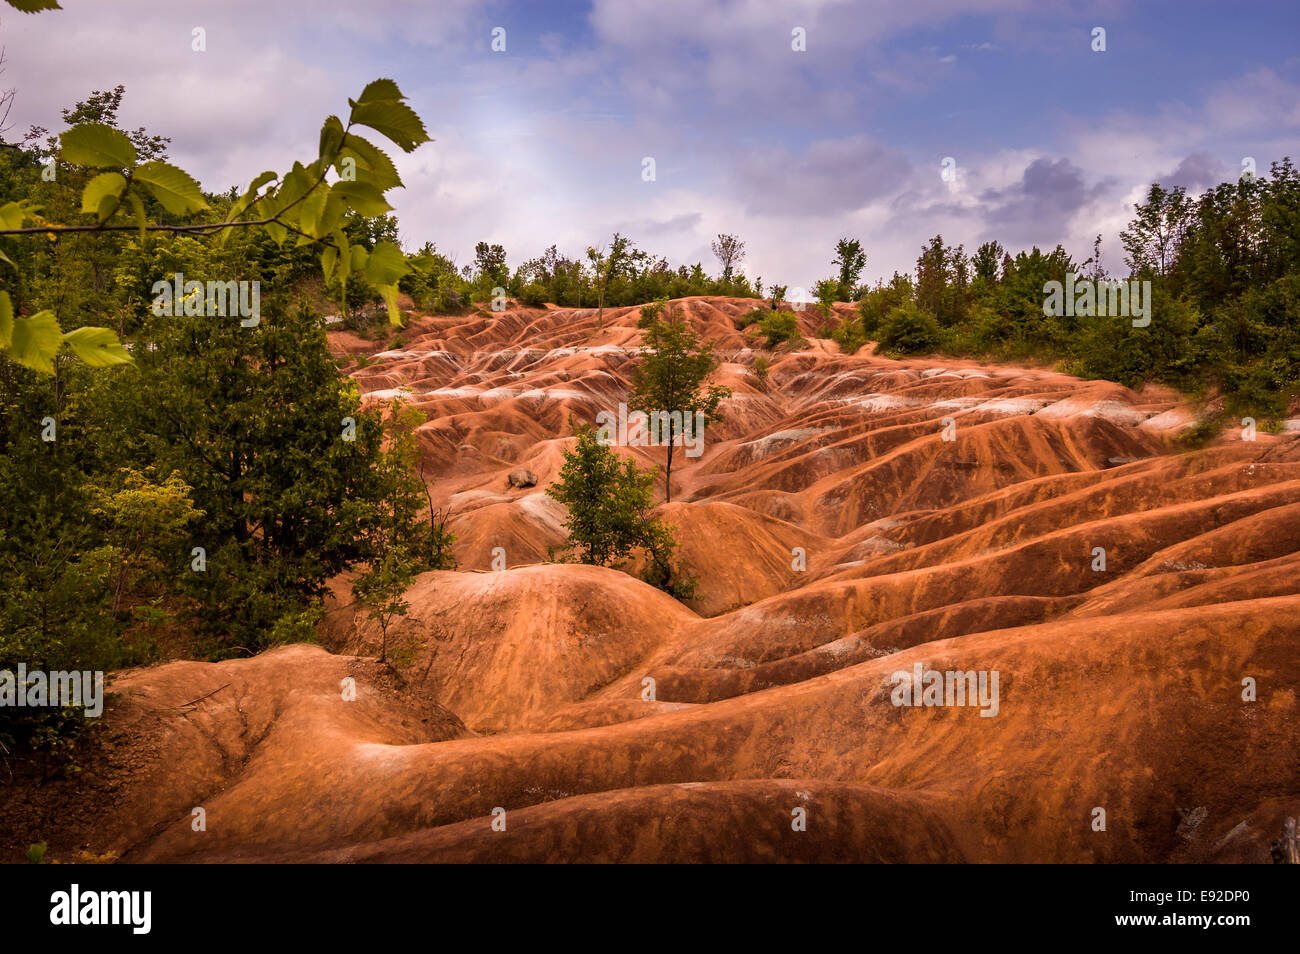 Cheltenham Badlands. Located in Caledon Ontario Canada this red colored soil is a result of iron oxide deposits. Stock Photo